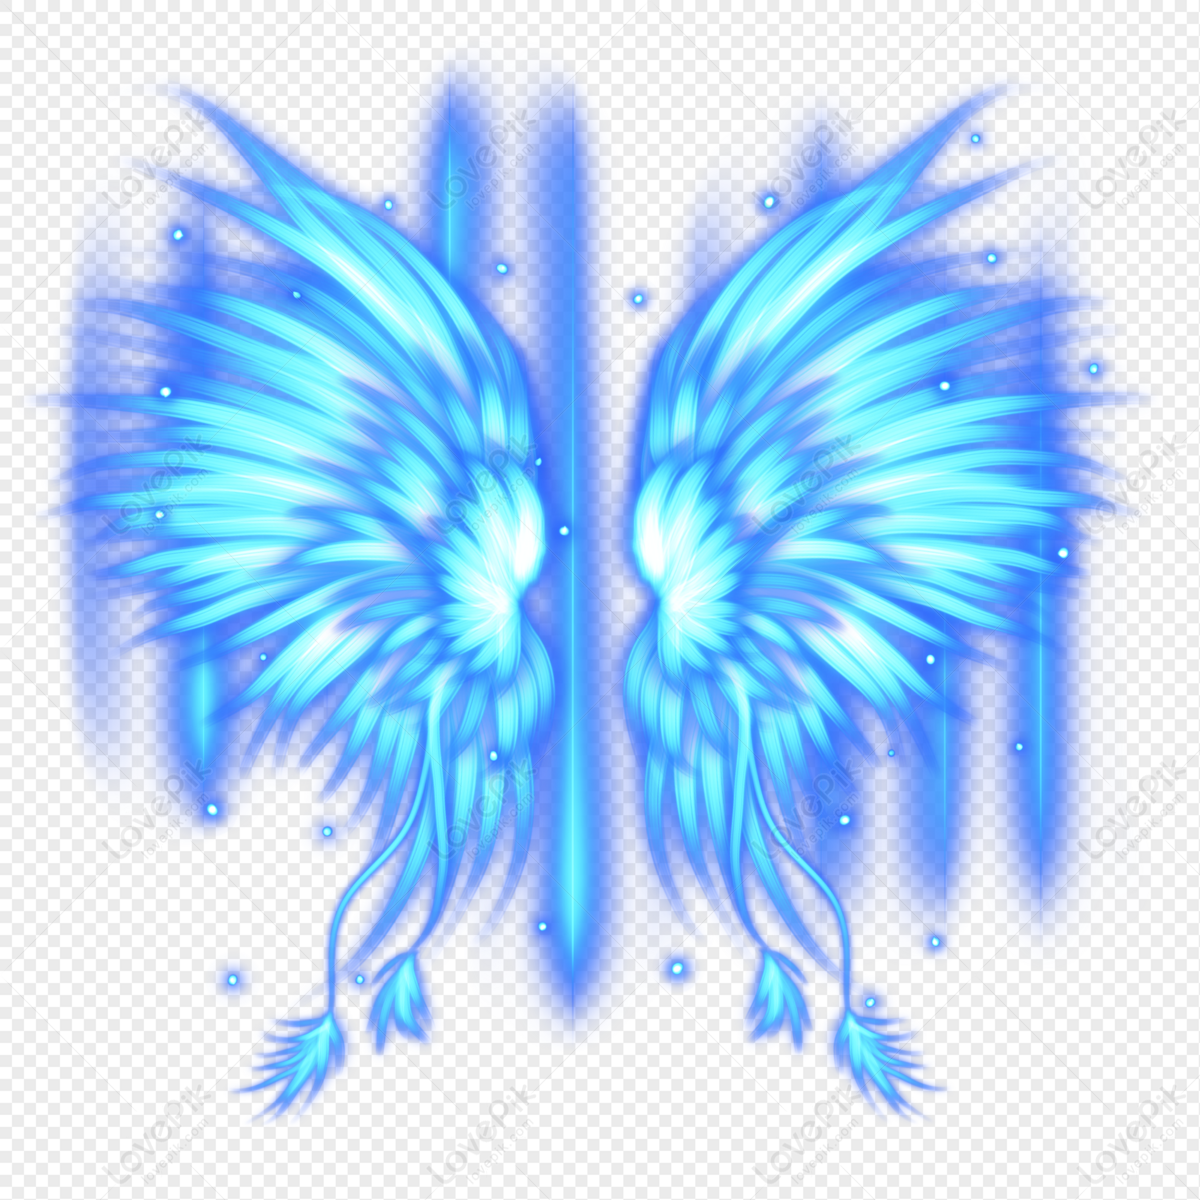 Fantasy Light Blue Wings PNG Transparent And Clipart Image For Free  Download - Lovepik | 401532276